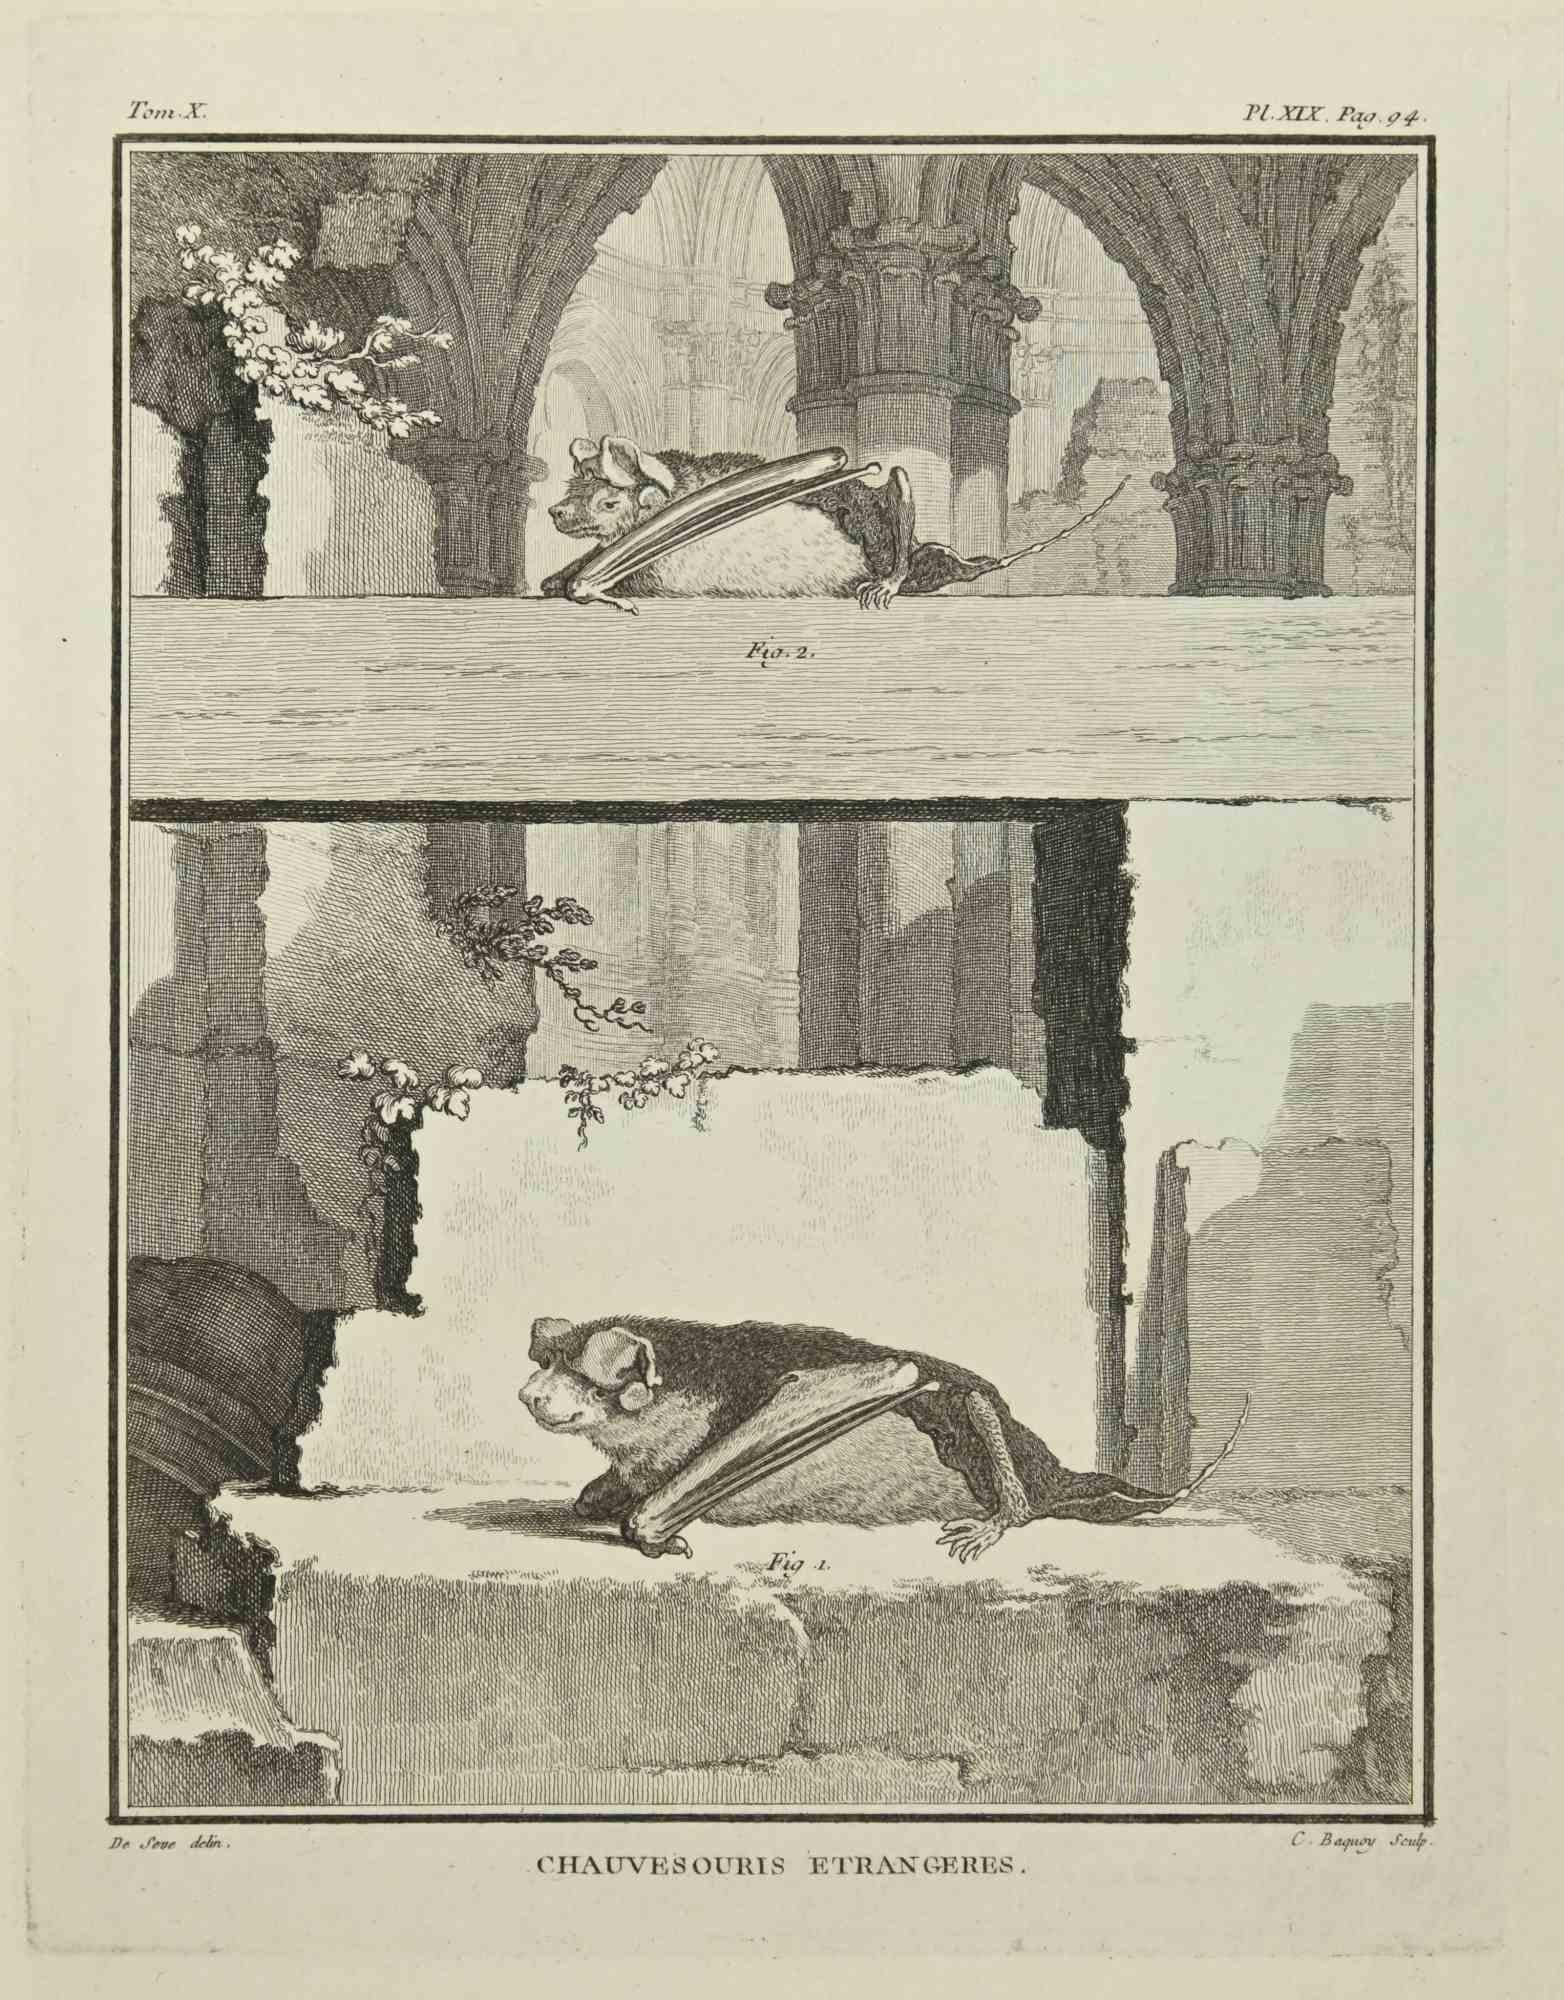 Chauvesouris is an etching realized by Jean Charles Baquoy in 1771.

It belongs to the suite "Histoire Naturelle de Buffon".

The Artist's signature is engraved lower right.

Good conditions.